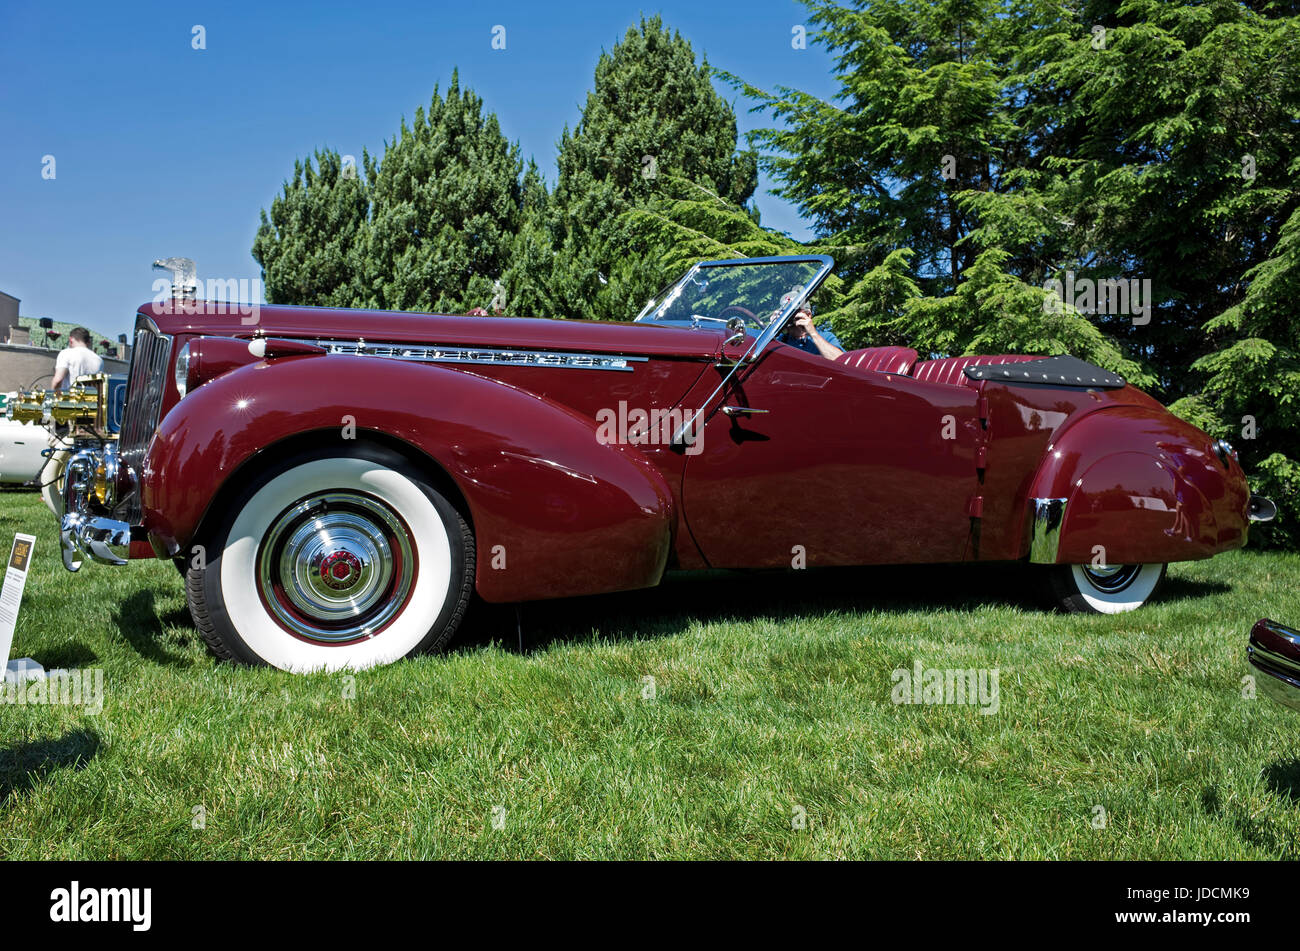 Hershey, PA-June 11, 2017: 1940 Packard 1806 Custom Super Eight Convertible Victoria Darrin stands on display at the Elegance at Hershey. Stock Photo